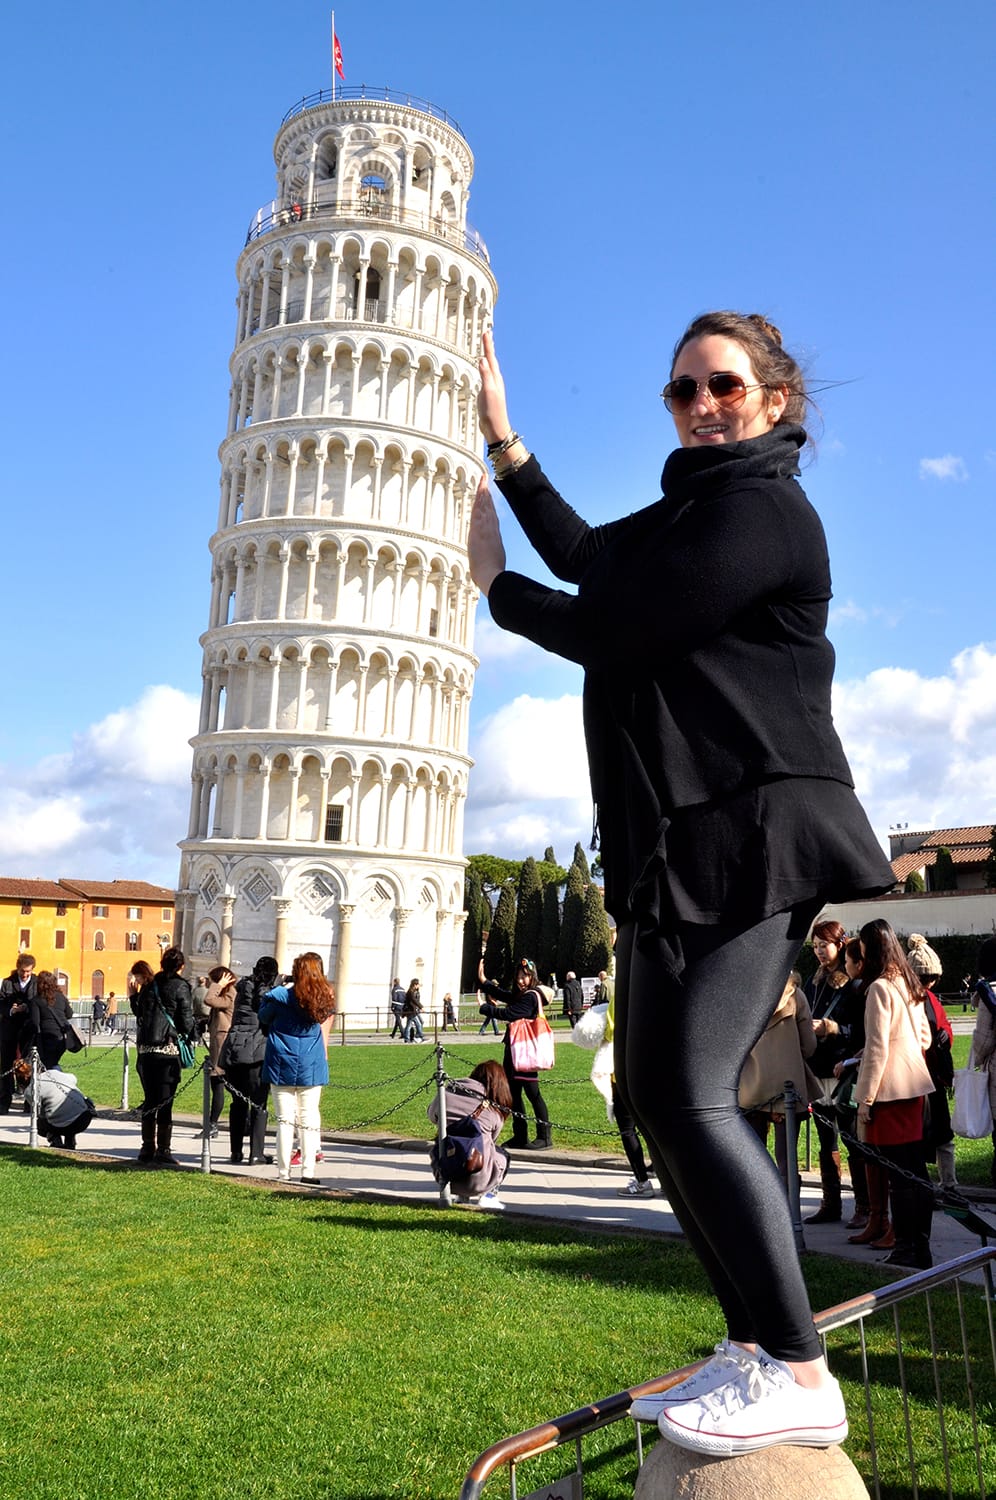 A woman holds her hands to create an optical illusion of holding up the Leaning Tower of Pisa